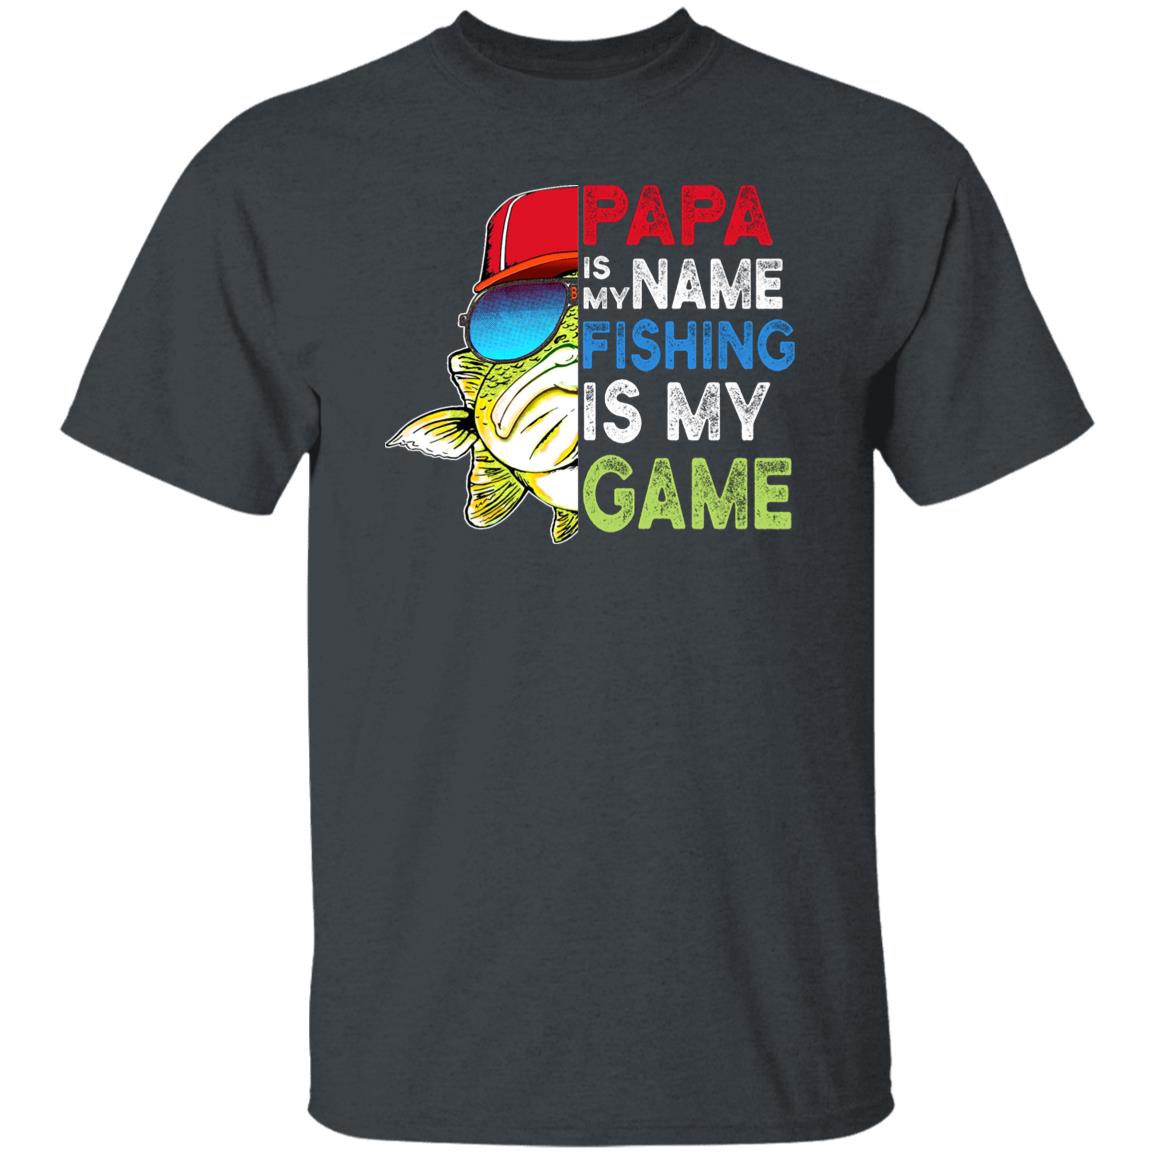 Papa is my name fishing is my game shirt gift for dad Black Navy Dark Heather-Dark Heather-Family-Gift-Planet